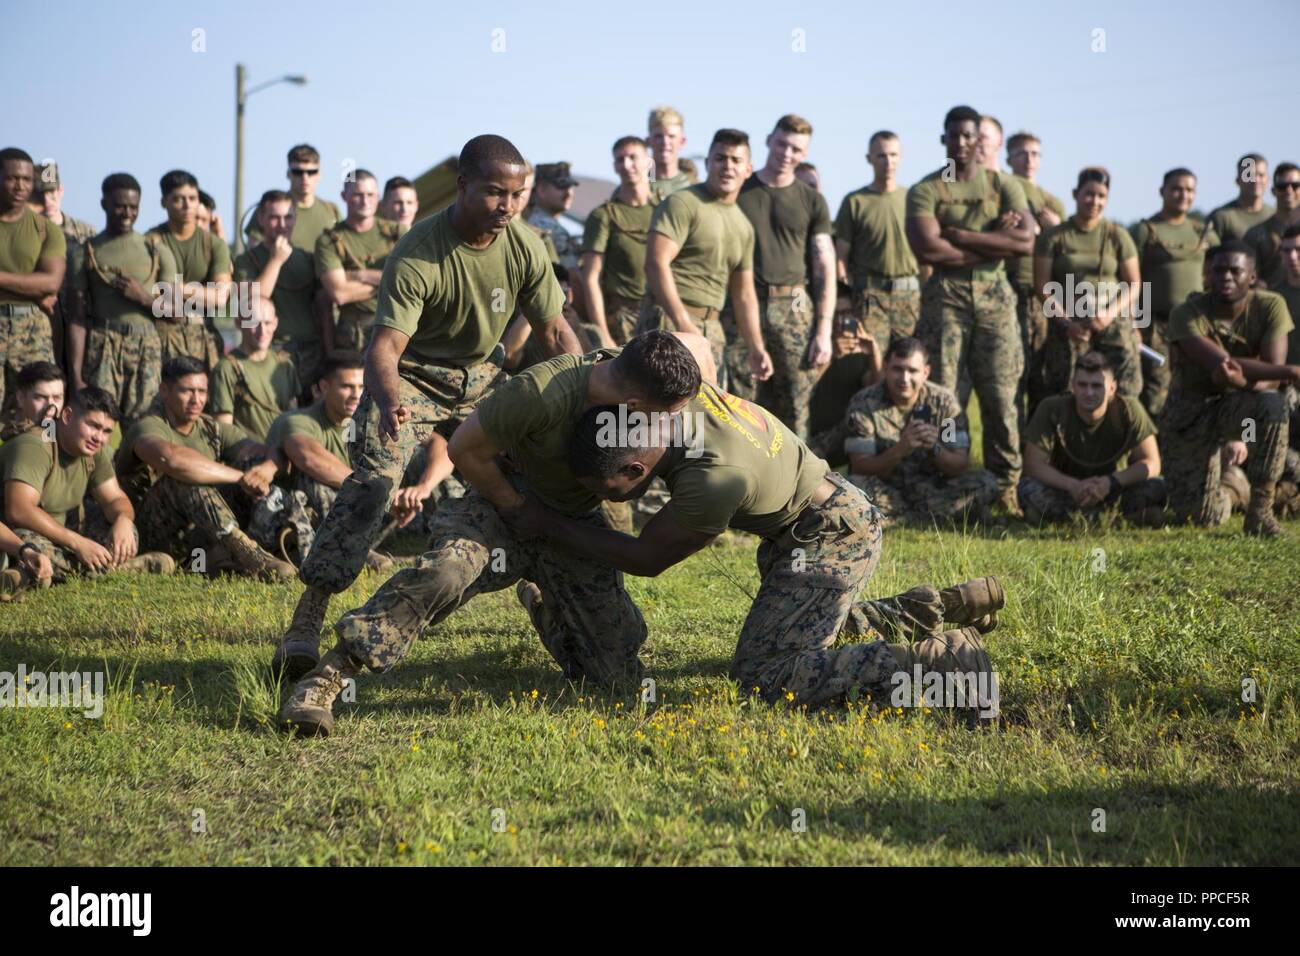 U.S. Marines with Marine Wing Communications Squadron (MWCS) 28, compete in a ground fighting competition during the Spartan Cup at Marine Corps Air Station Cherry Point, N.C., Aug. 17, 2018. MWCS-28 conducts a semiannual Spartan Cup to raise moral and improve unit cohesion. MWCS-28 is with Marine Air Control Group 28, 2nd Marine Aircraft Wing. Stock Photo